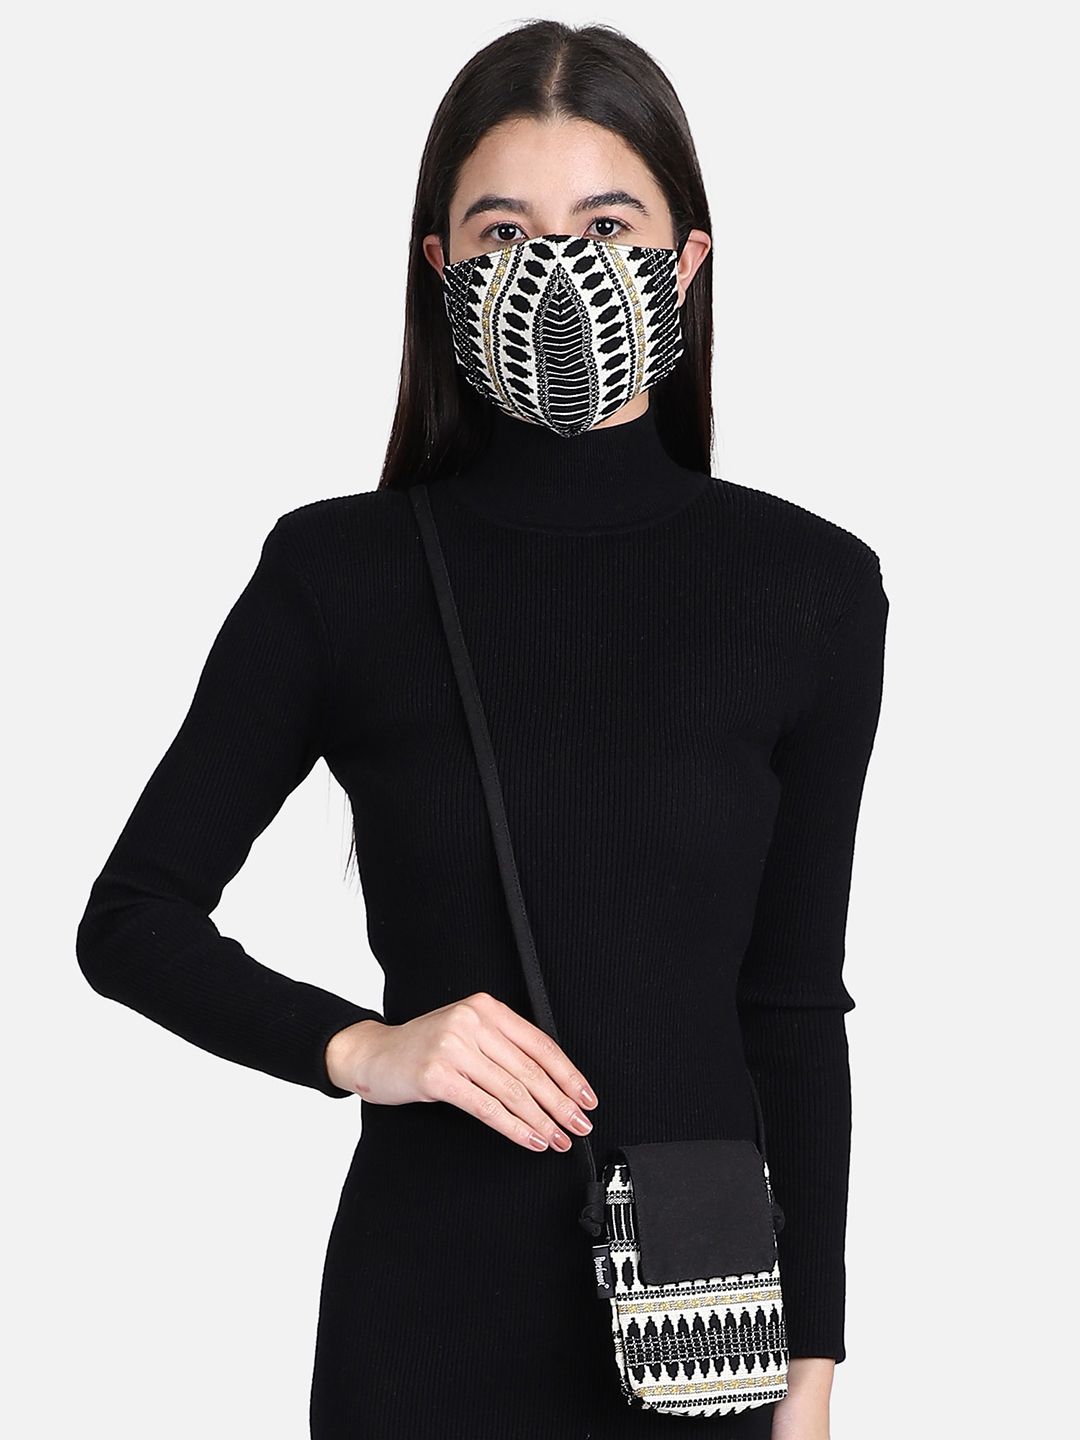 Anekaant Black & White Jacquard Reusable 3-Ply Fabric Fashion Mask With Mobile Sling Price in India